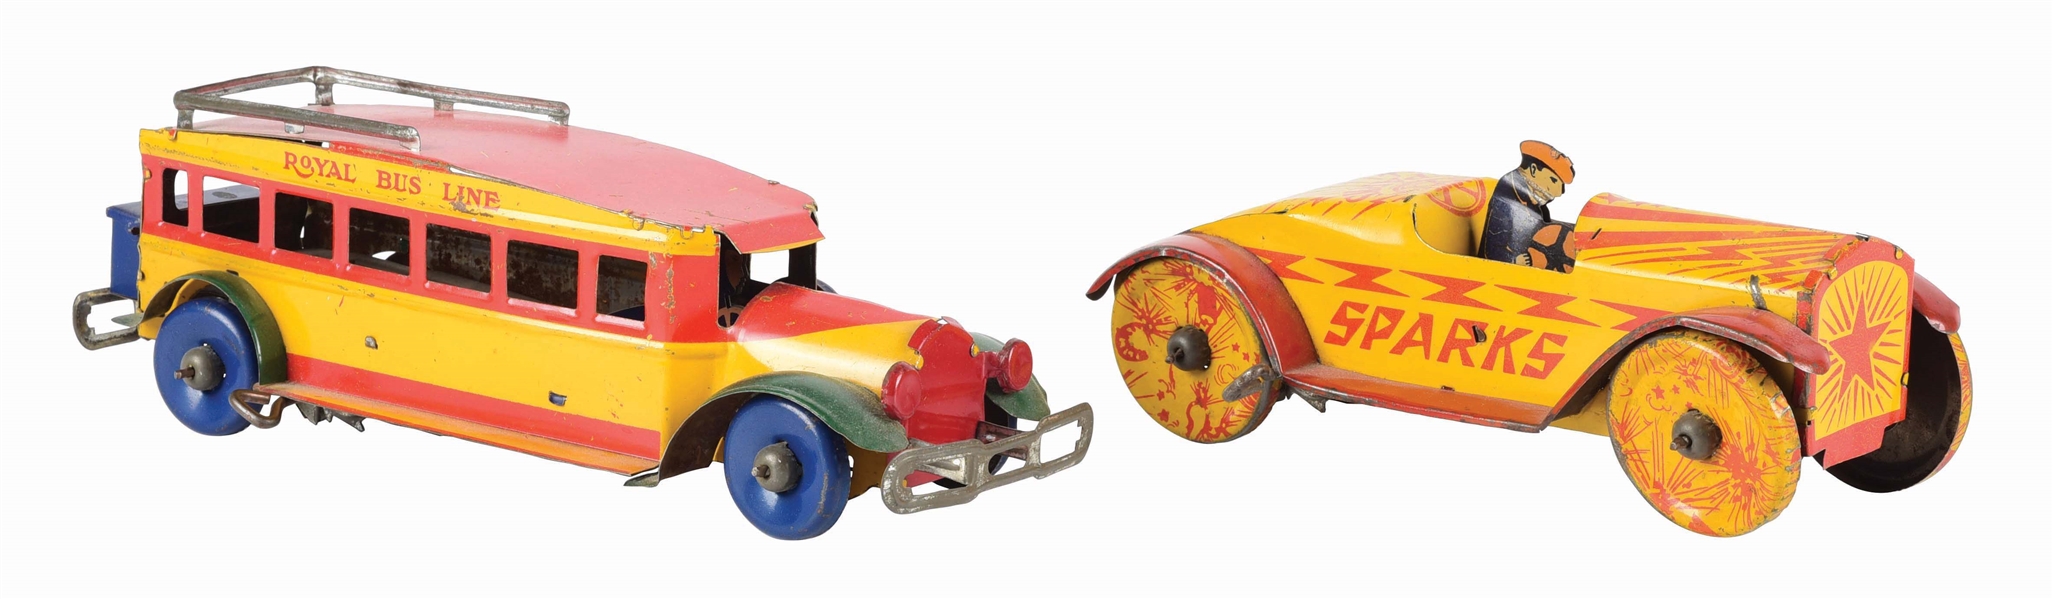 LOT OF 2: PRE-WAR TIN LITHO MARX WIND-UP VEHICLE TOYS.